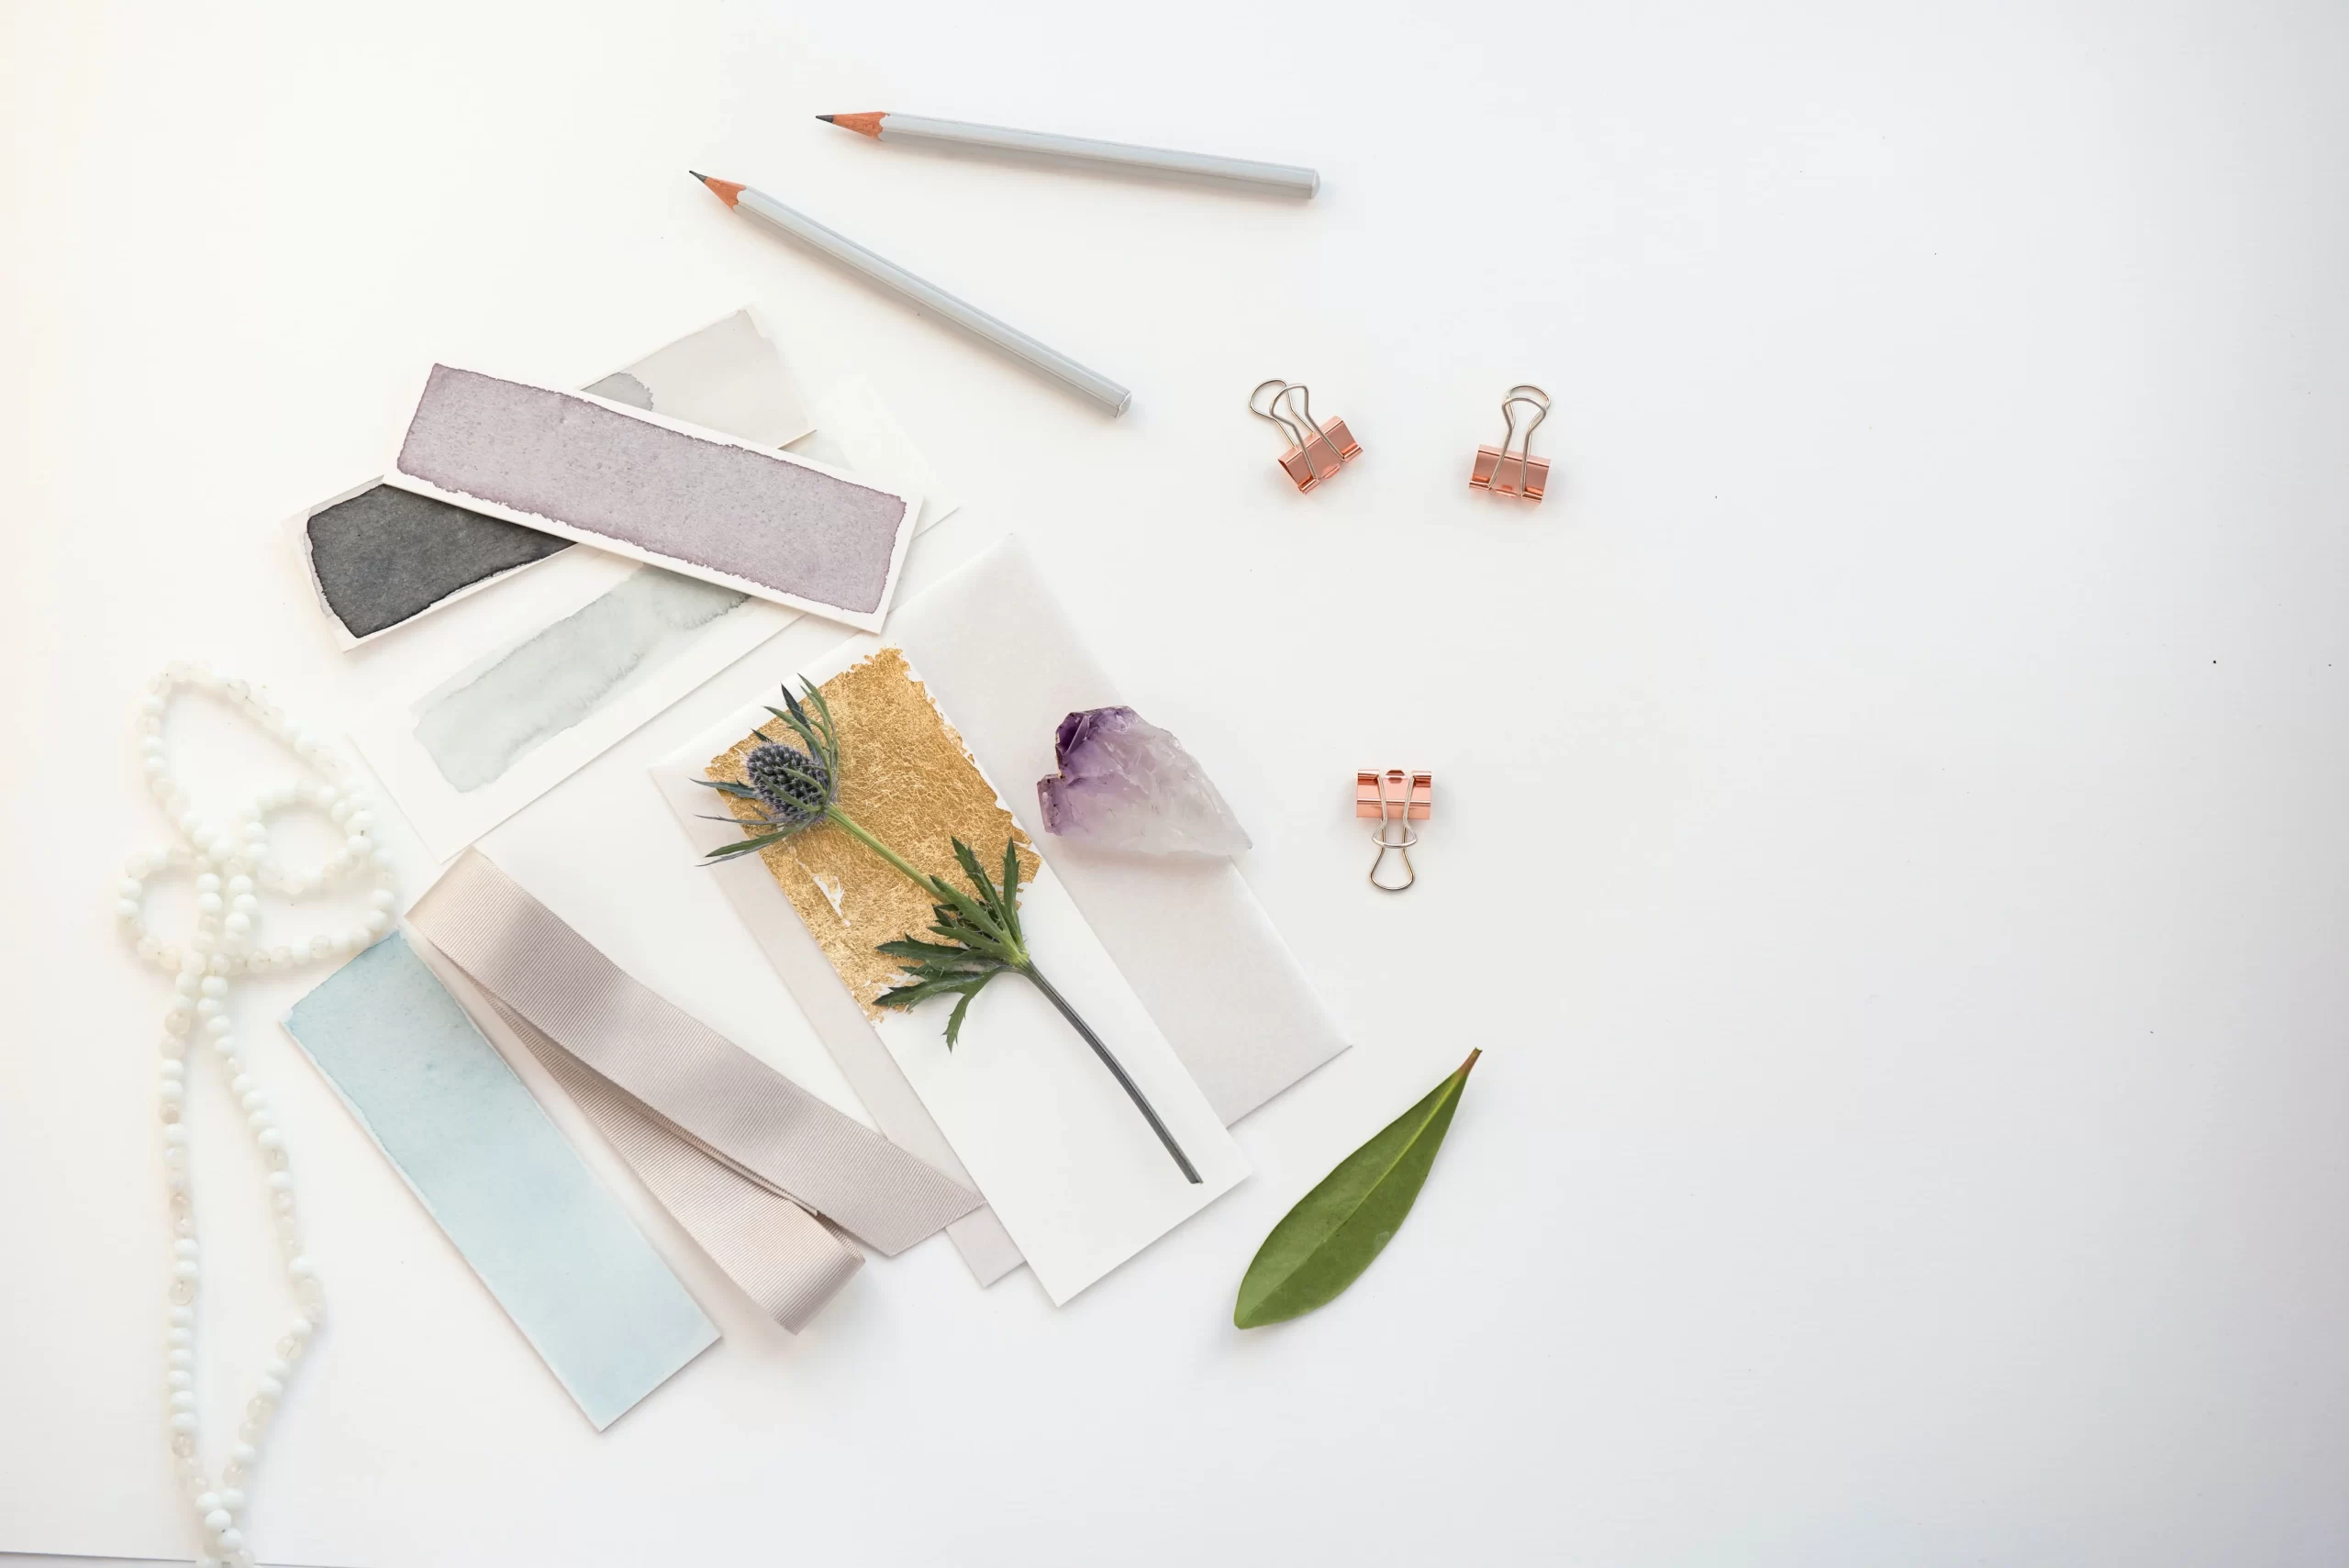 Unleash Your Imagination How to Create a Mood Board Thumbnail  - Unleash Your Imagination How to Create a Mood Board Thumbnail scaled - Unleash Your Imagination: How to Create a Mood Board